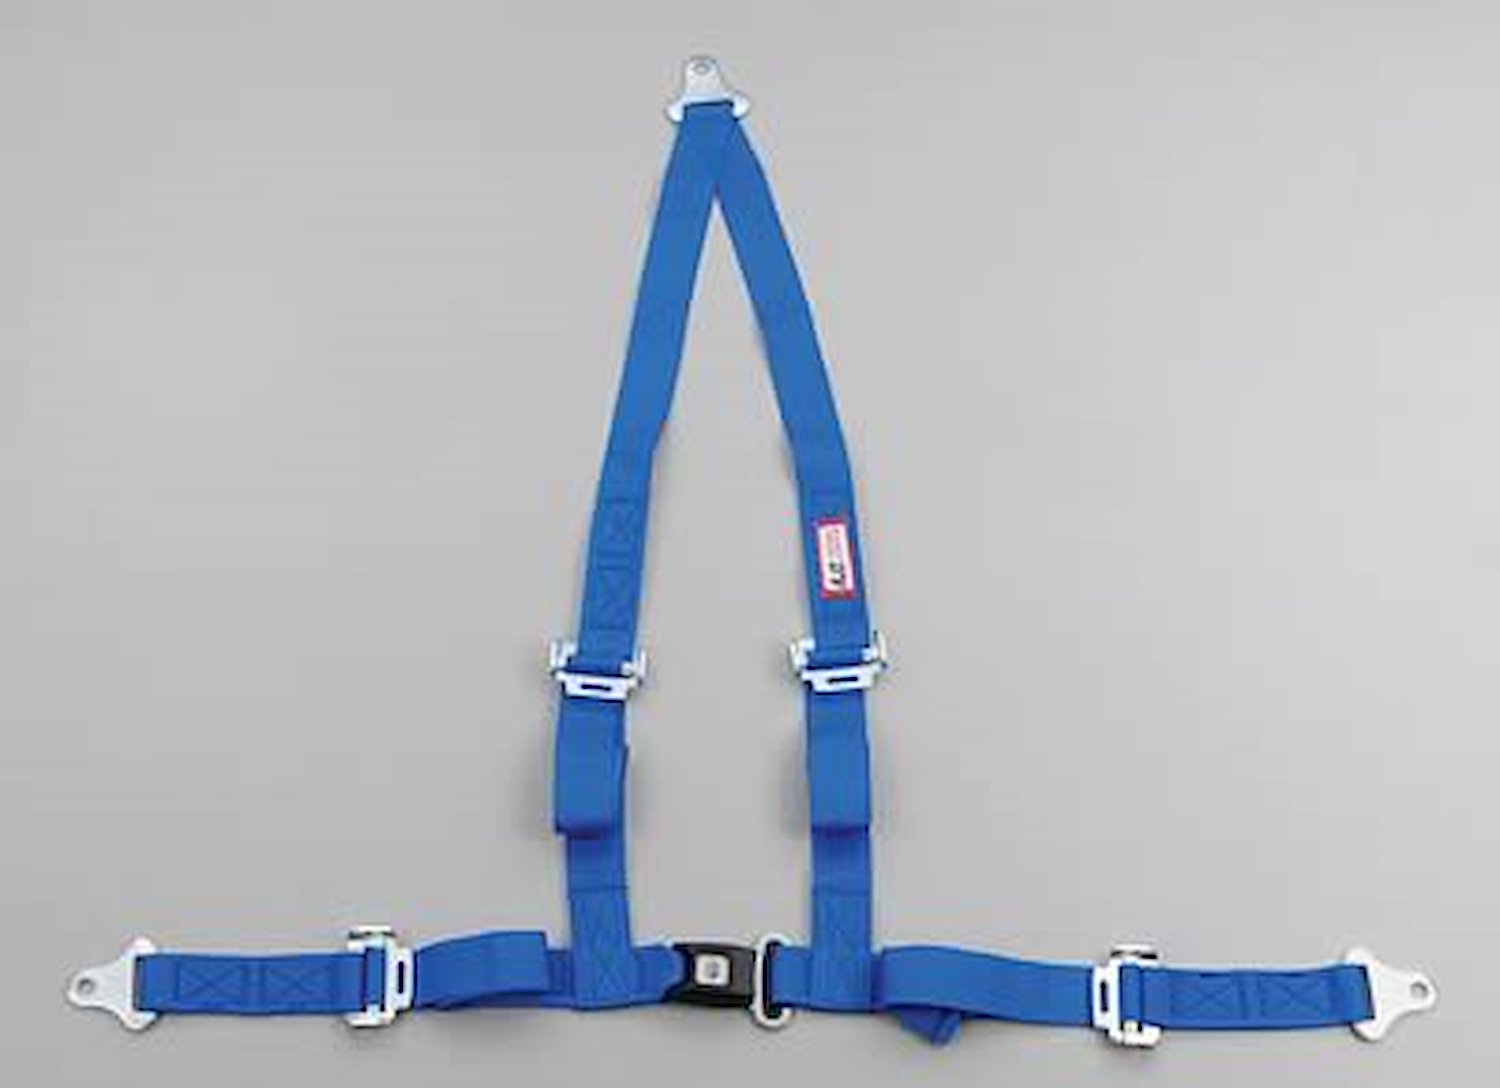 NON-SFI B&T HARNESS 2 PULL DOWN Lap Belt 2 S. H. Individual ROLL BAR Mount ALL WRAP ENDS w/STERNUM STRAP BLUE